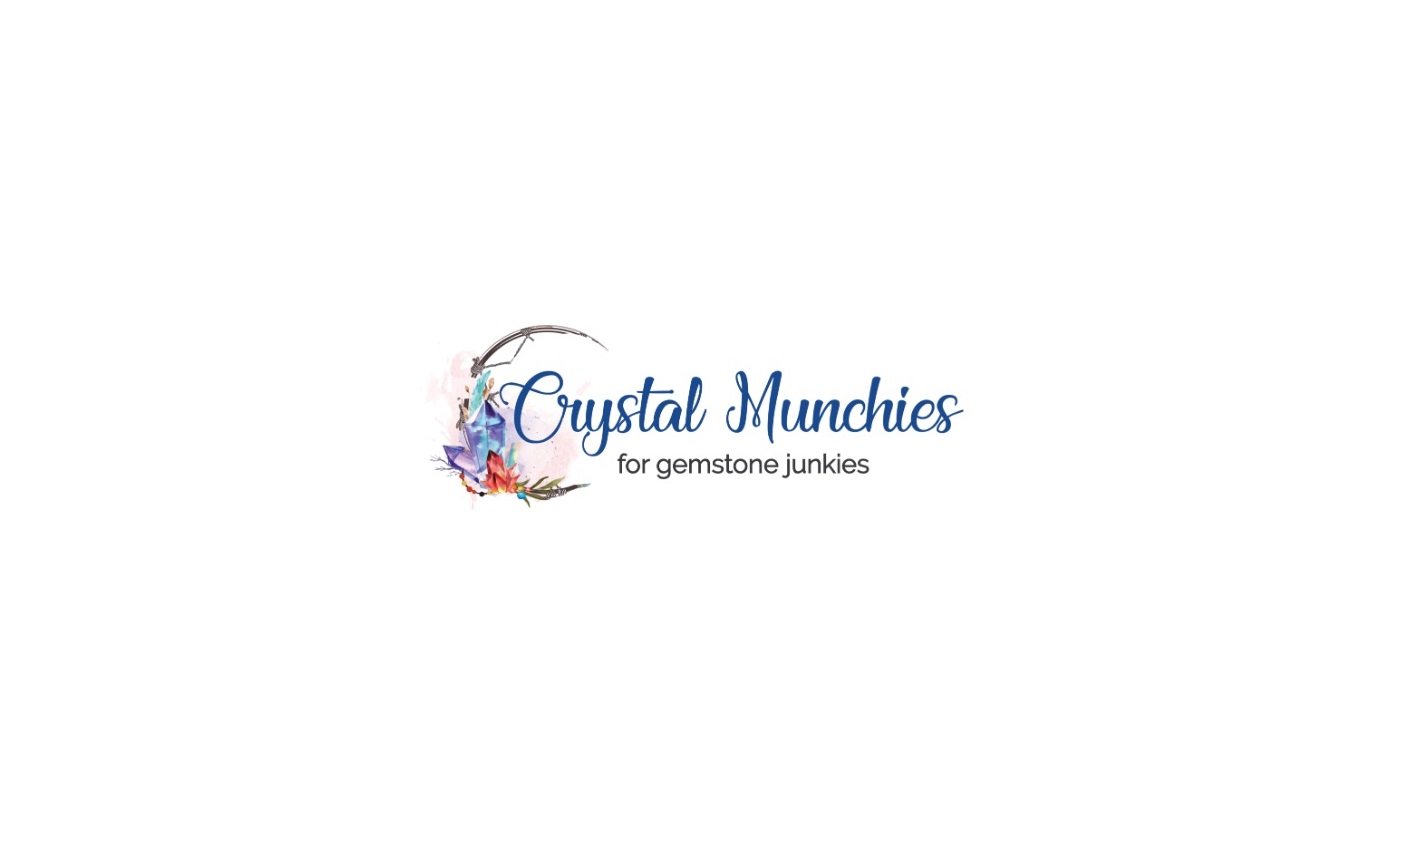 Buy Healing Crystals Near Me Our carefully curated collection offers a wide range of healing crystals, each with unique properties and energies.
For more, visit : https://crystalmunchies.com/ by crystalmunchies